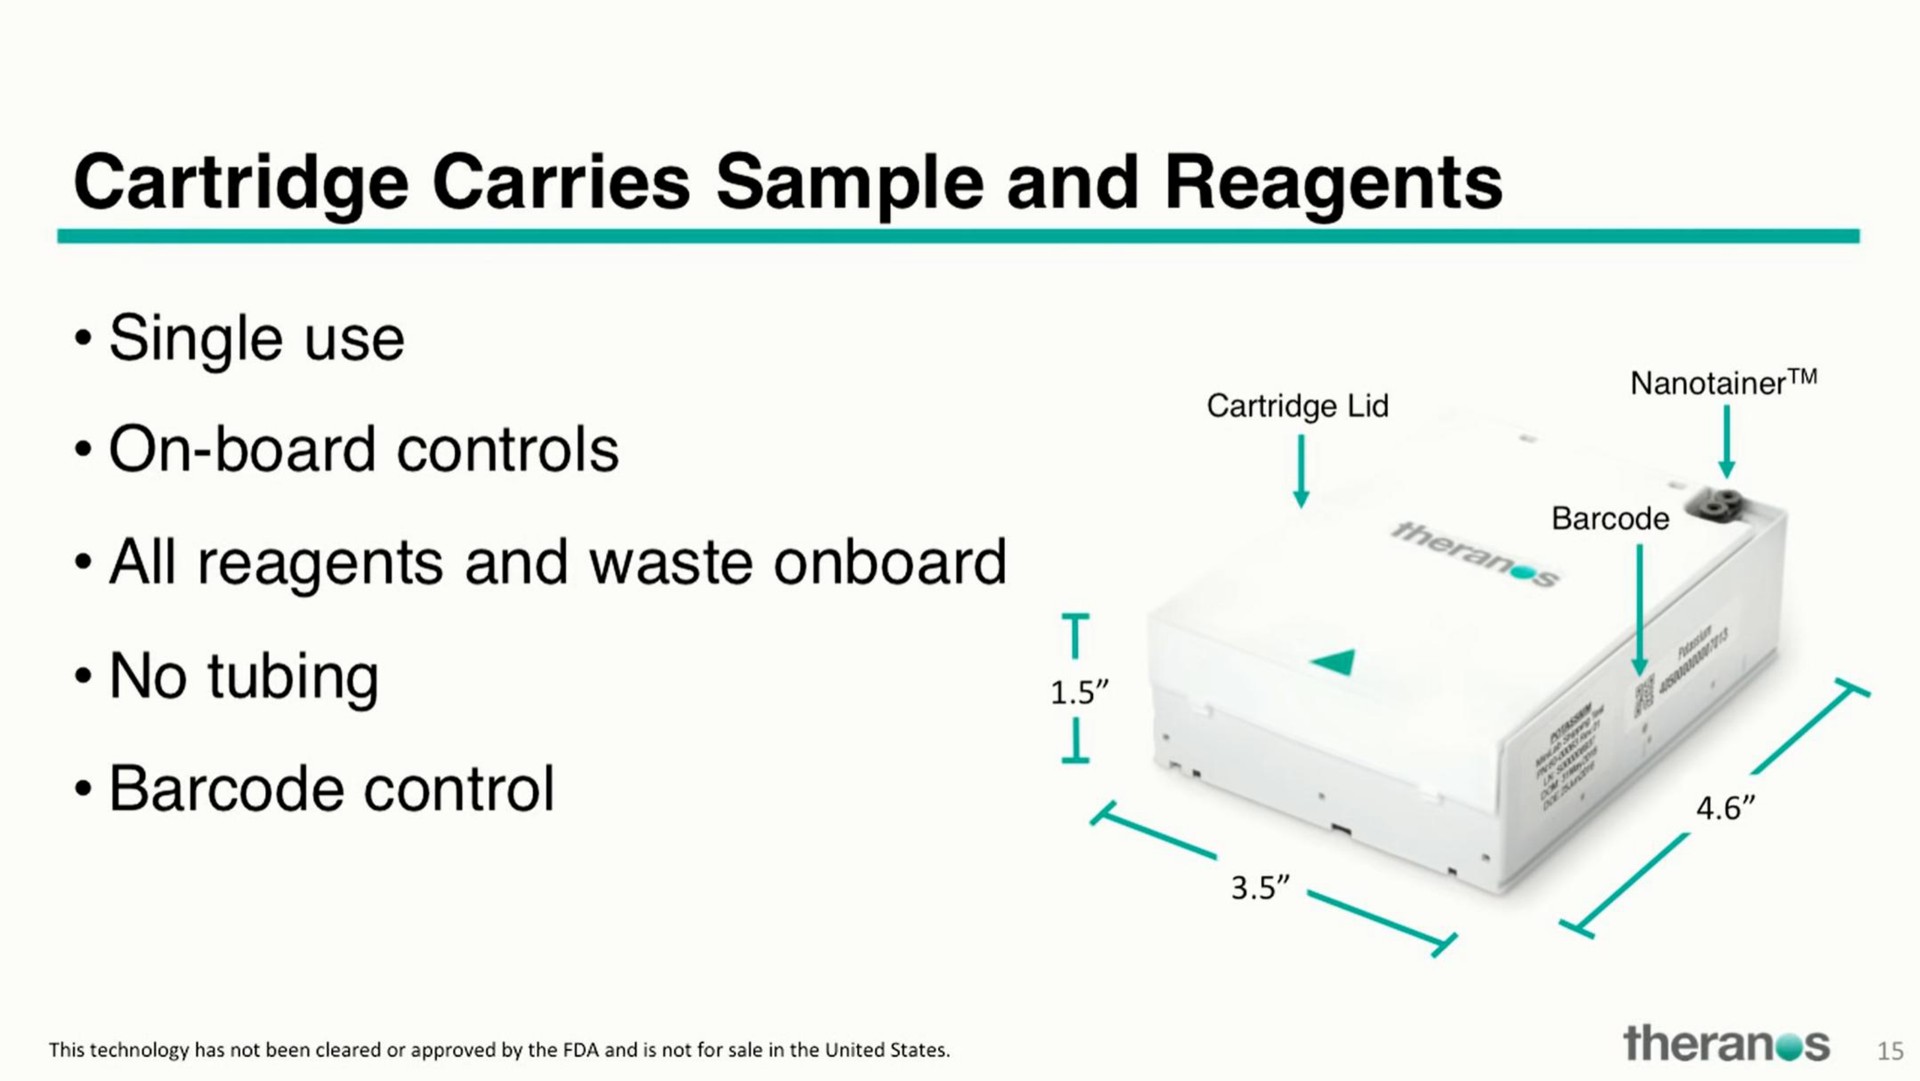 cartridge carries sample and reagents | Theranos